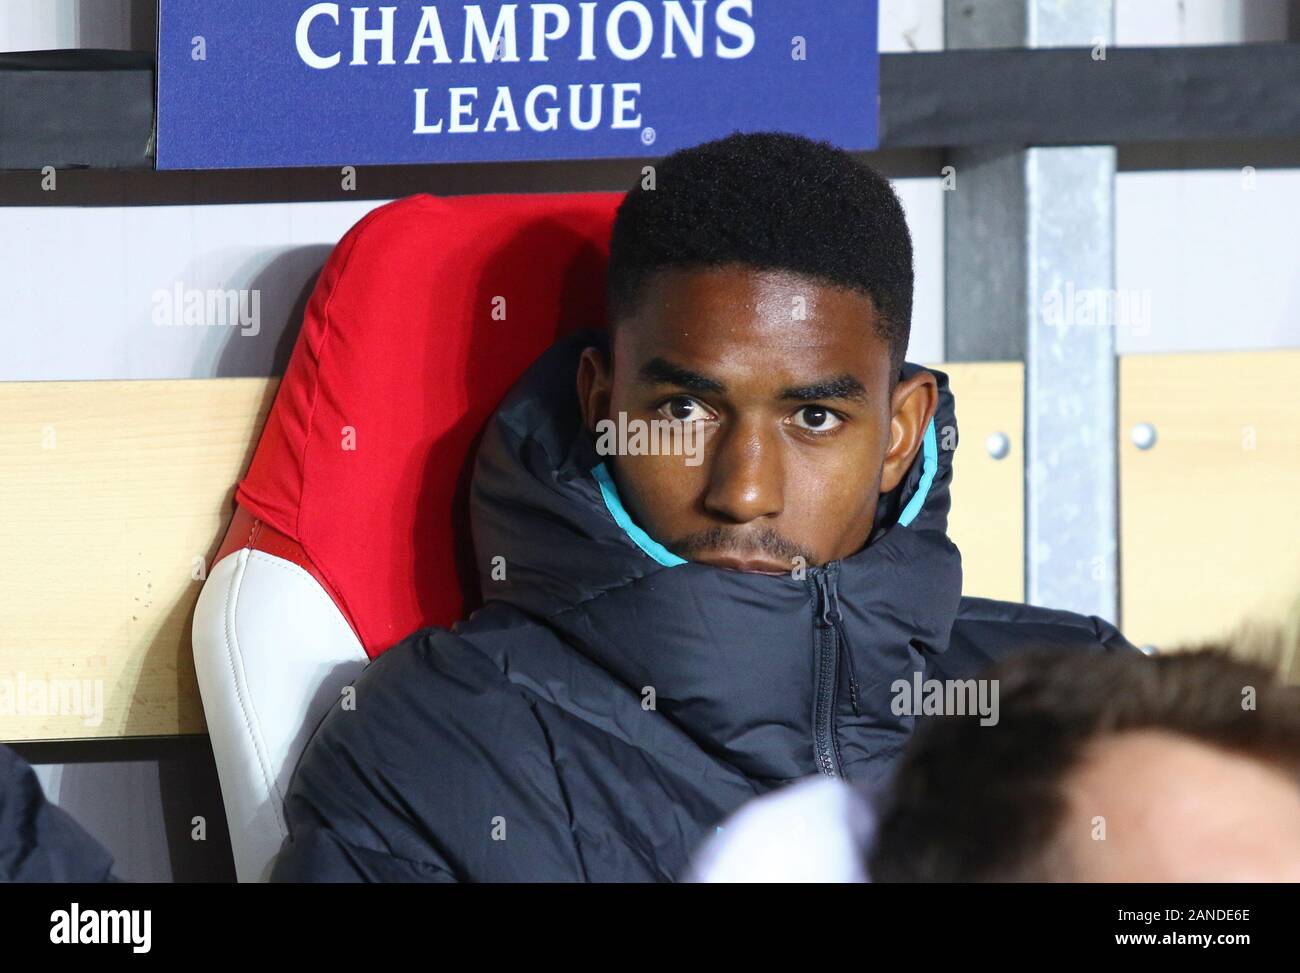 PRAGUE, CZECHIA - OCTOBER 23, 2019: Junior Firpo of Barcelona seats on a bench during the UEFA Champions League game against Slavia Praha at Eden Arena in Prague, Czech Republic Stock Photo